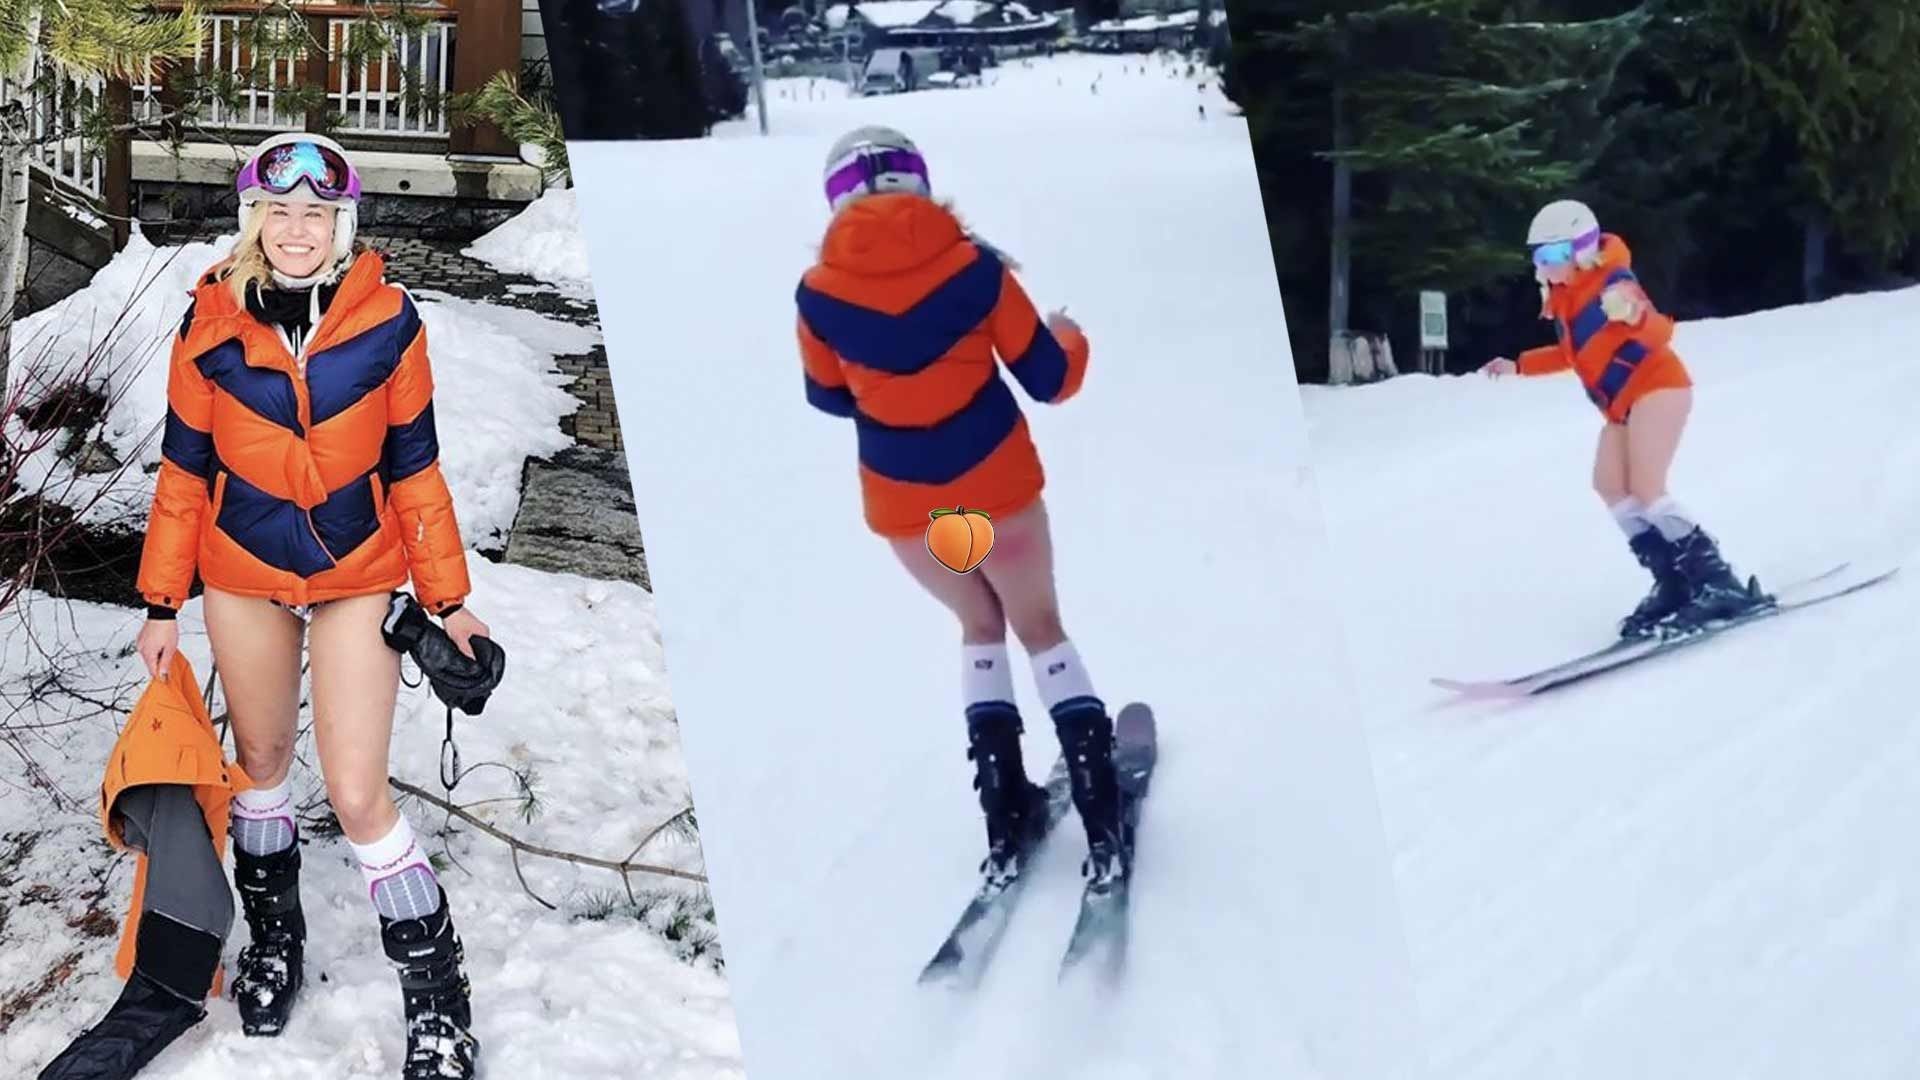 Chelsea Handler skis without pants while smoking weed to mark birthday